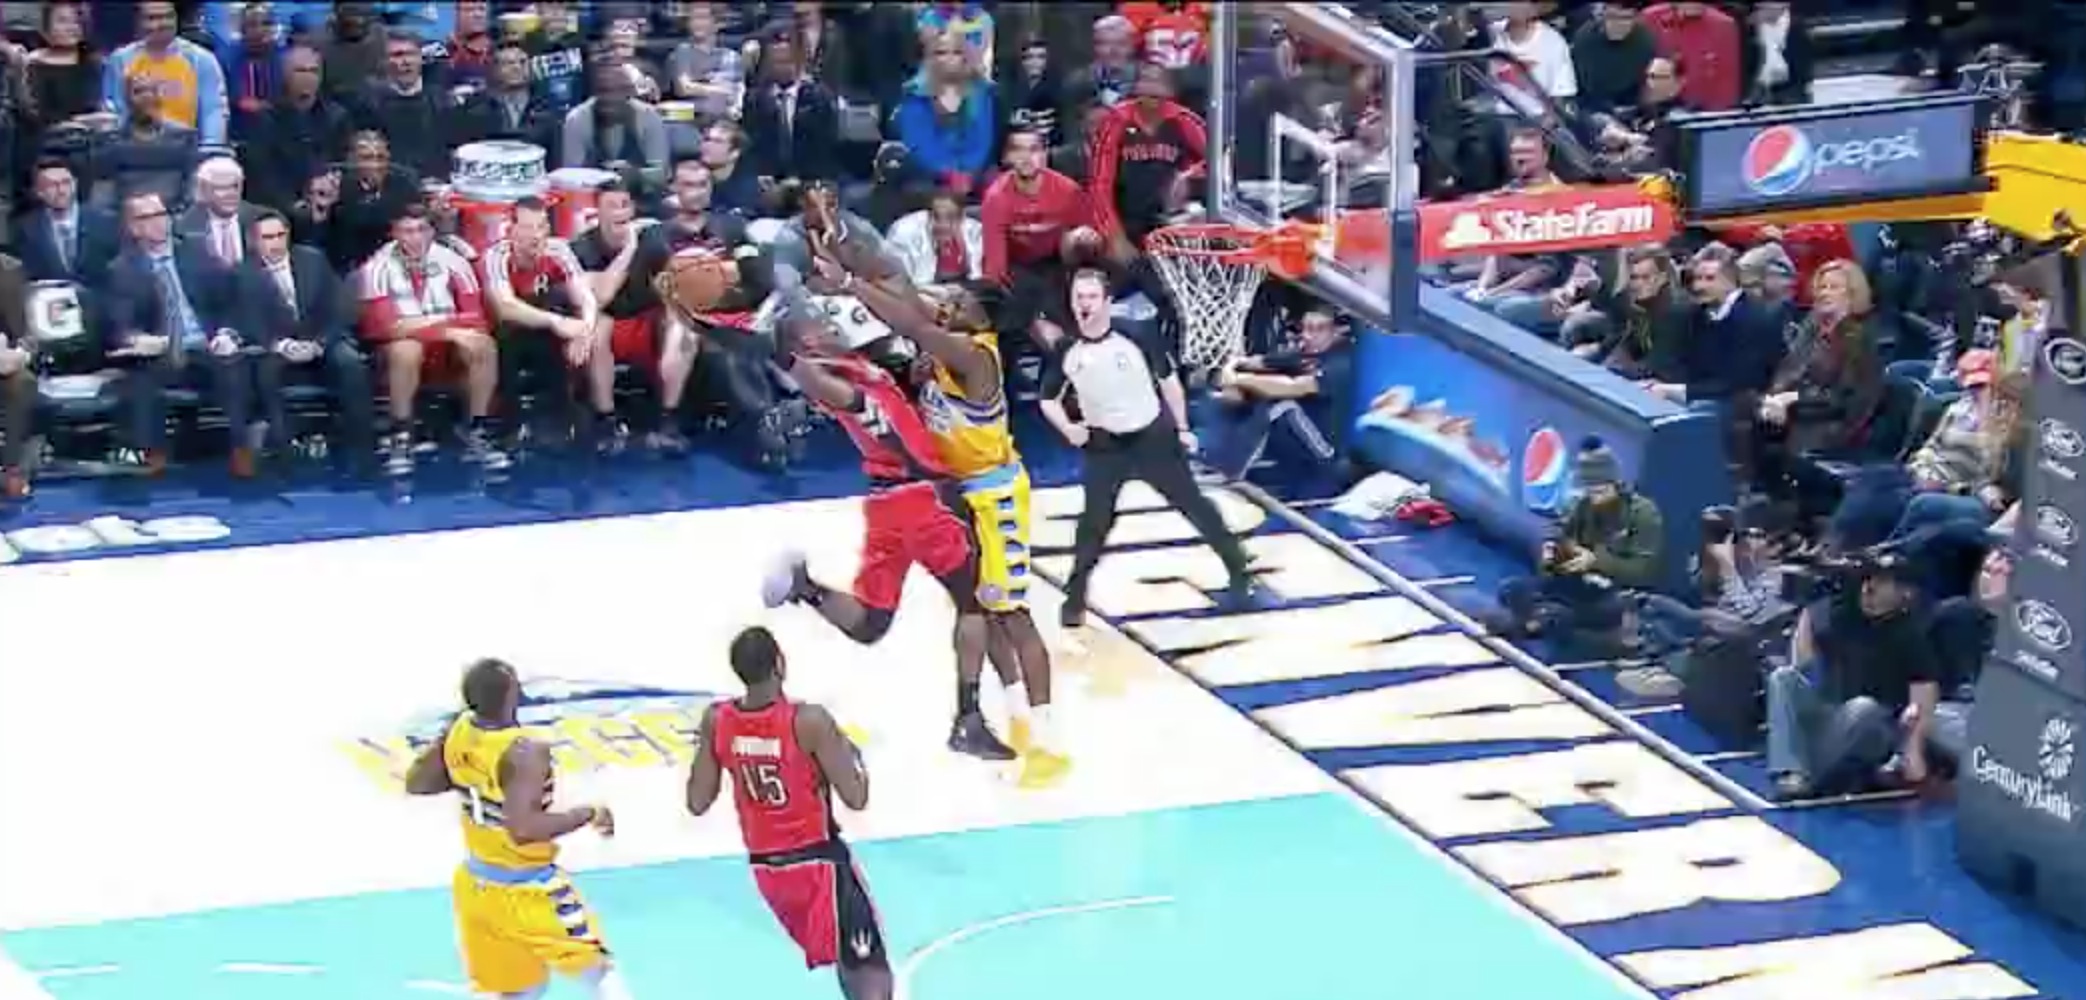 Video Terrence Ross Kenneth Faried Kevin Martin Tayshaun Prince